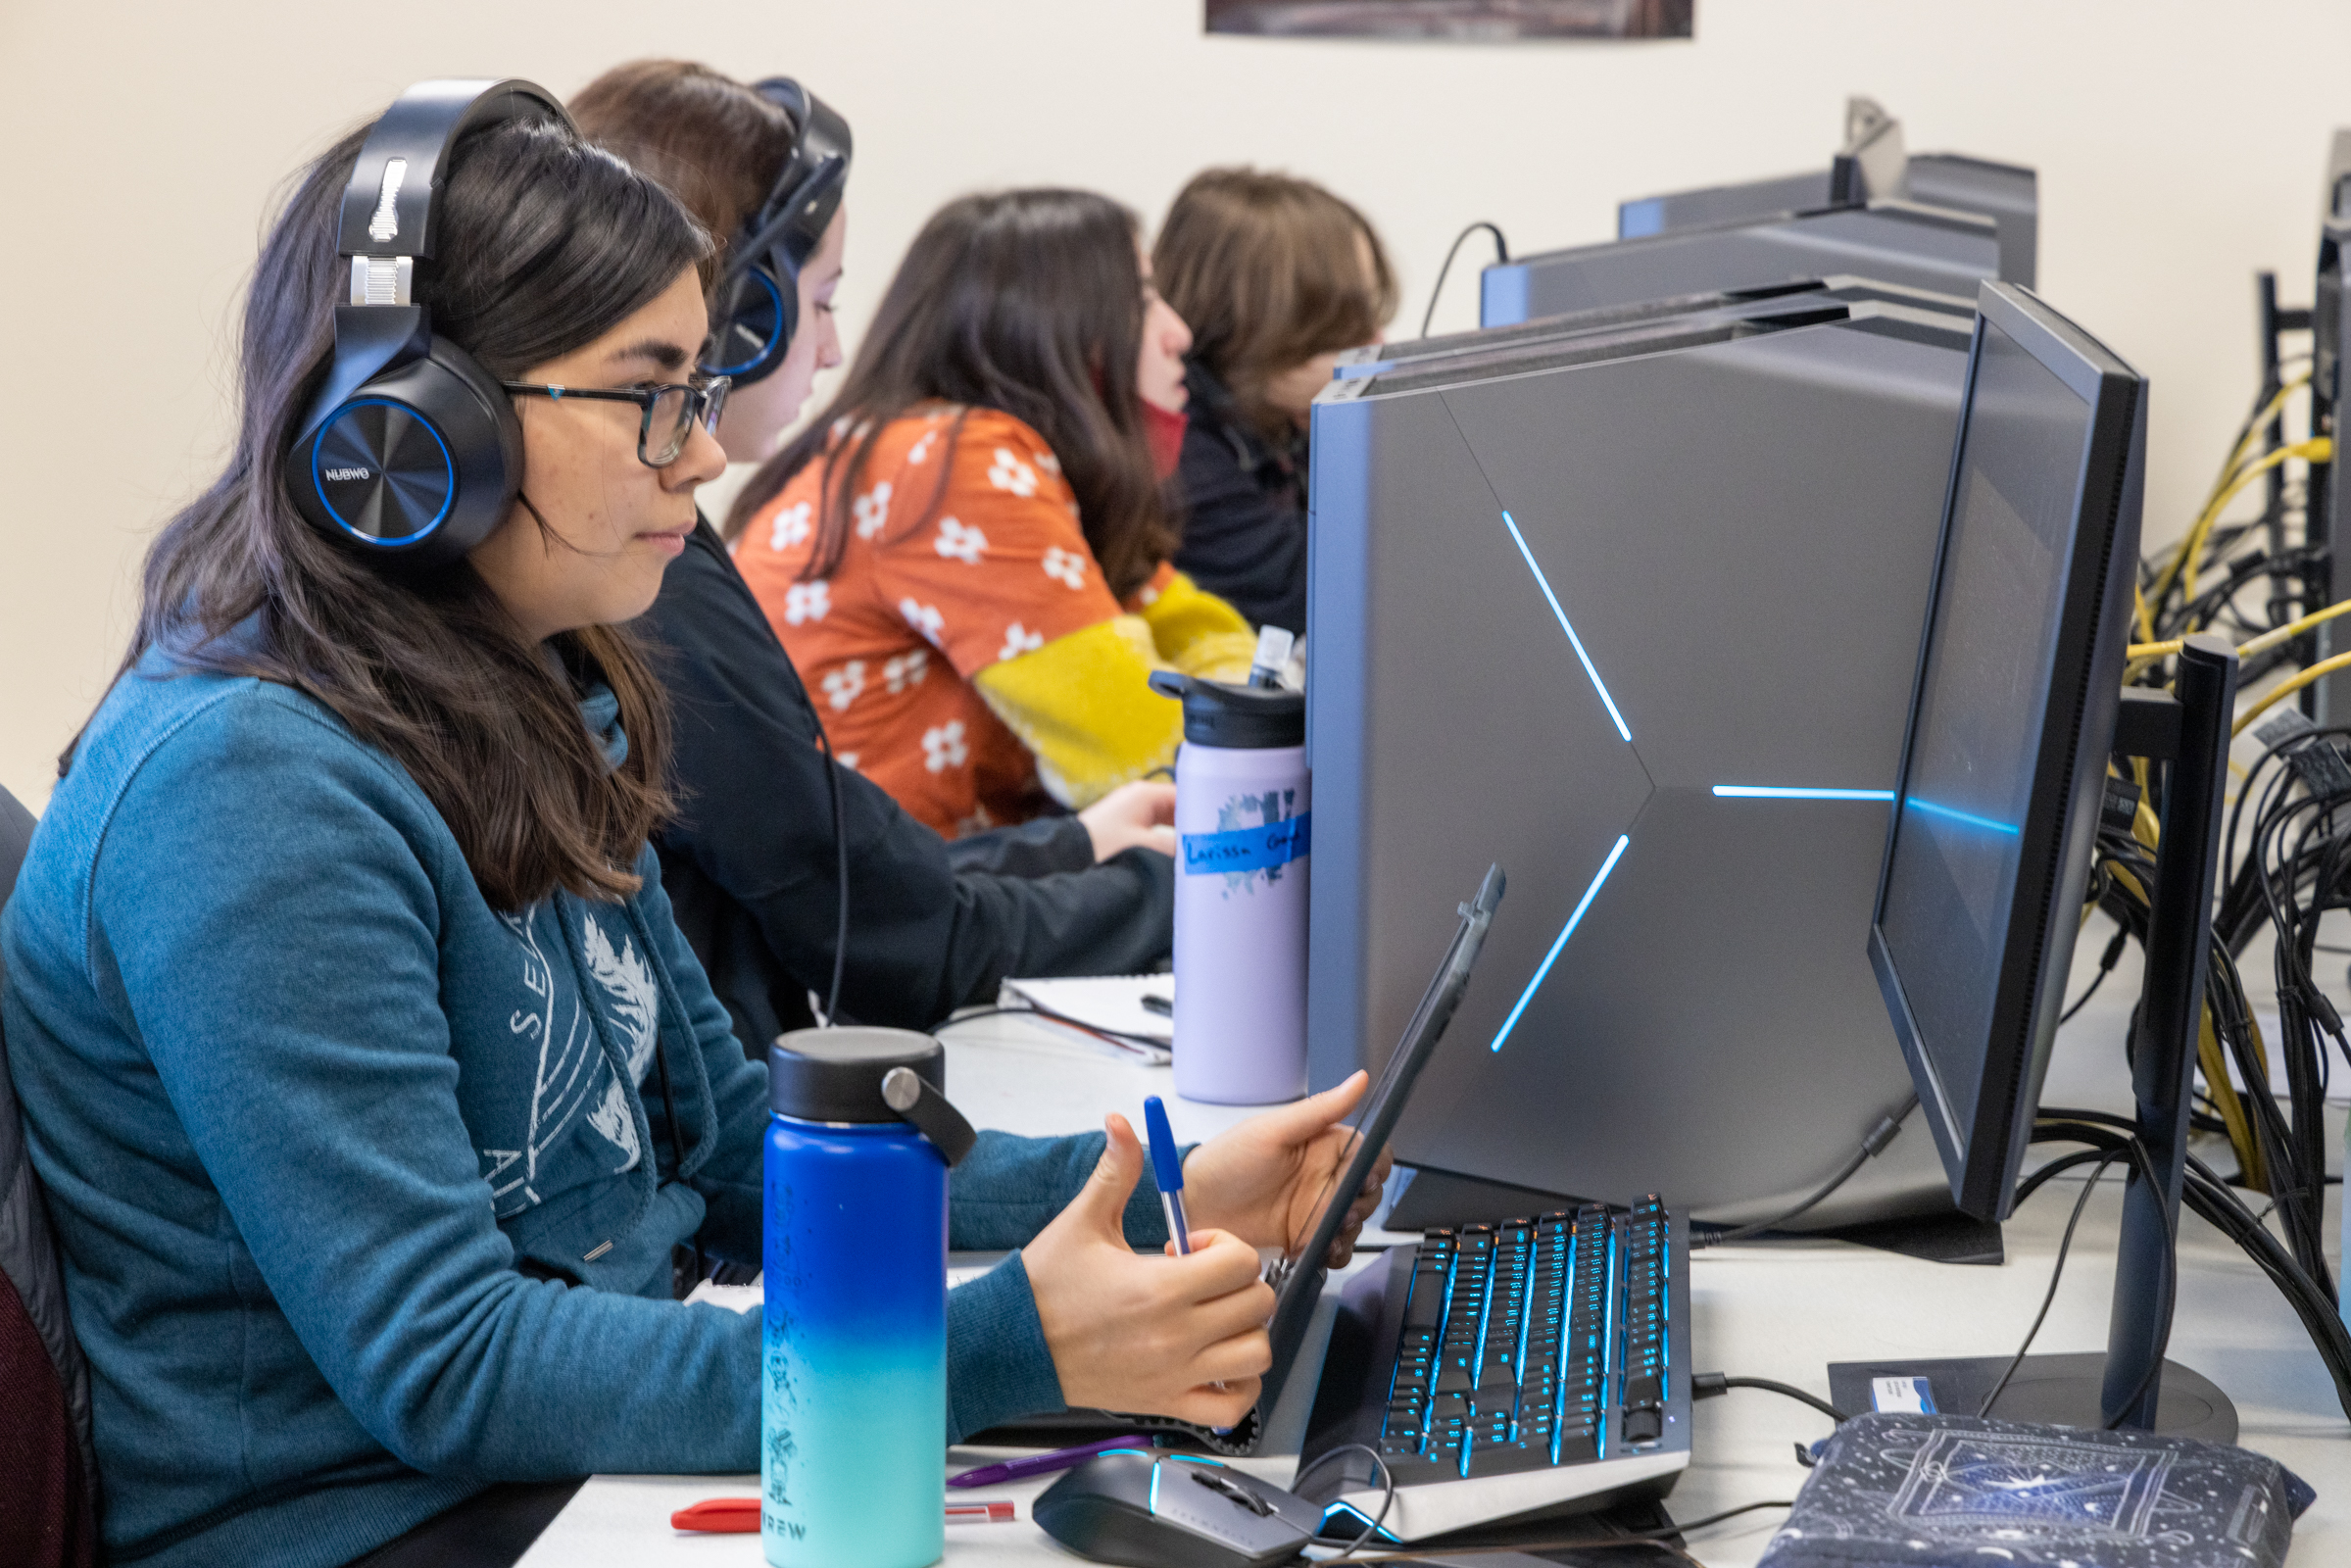 A female college student wearing headphones works at a computer. Three other students work at computers in the background.